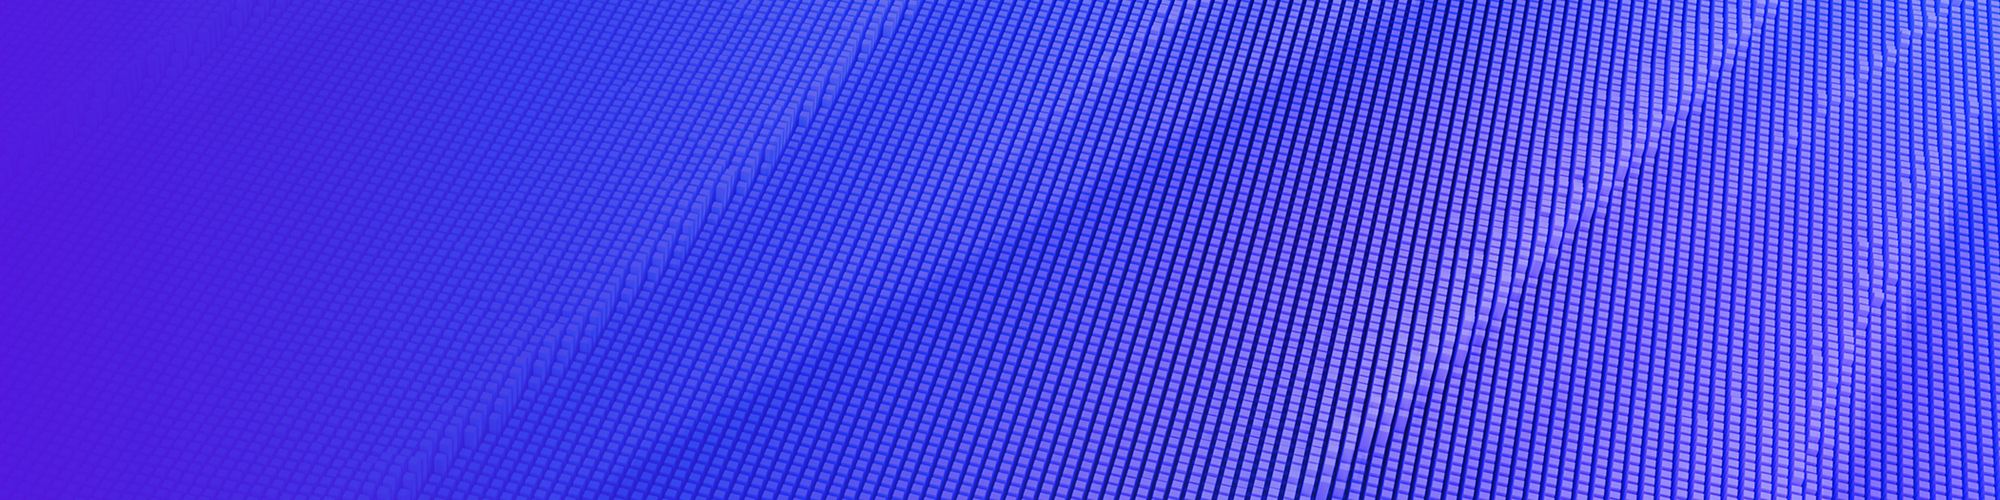 Blue blocks pattern abstract background